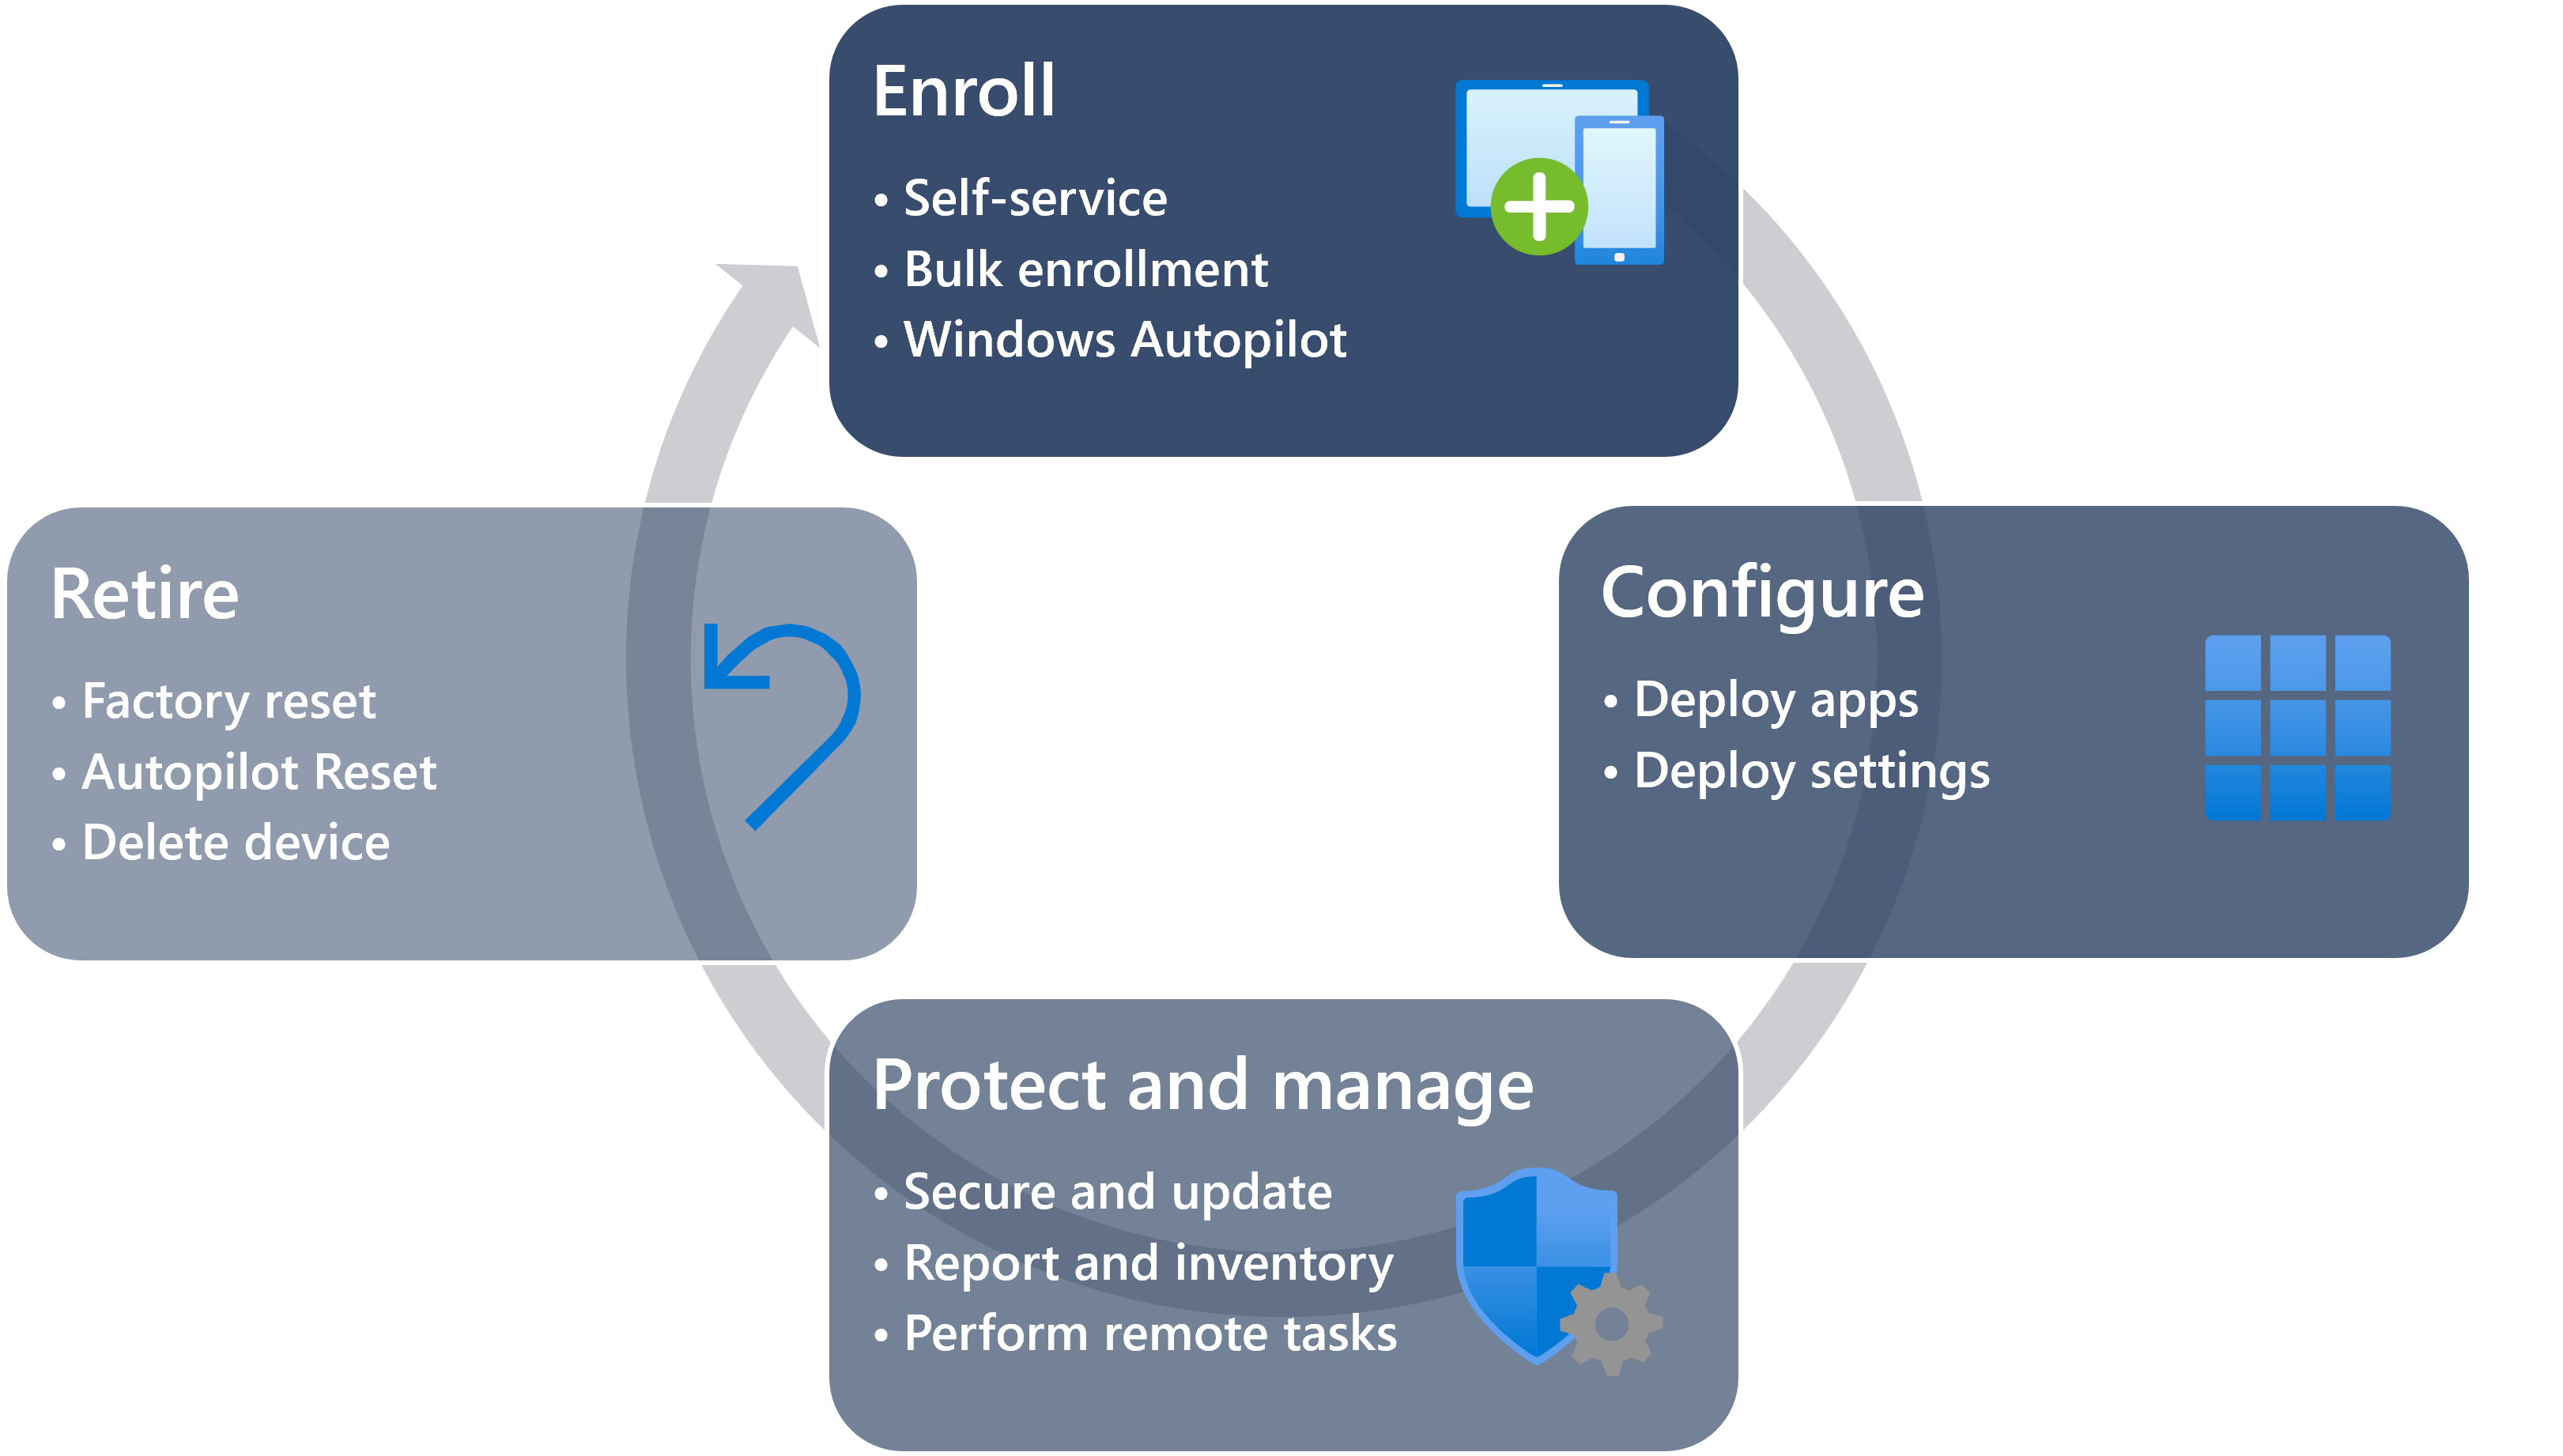 The device lifecycle for Intune-managed devices